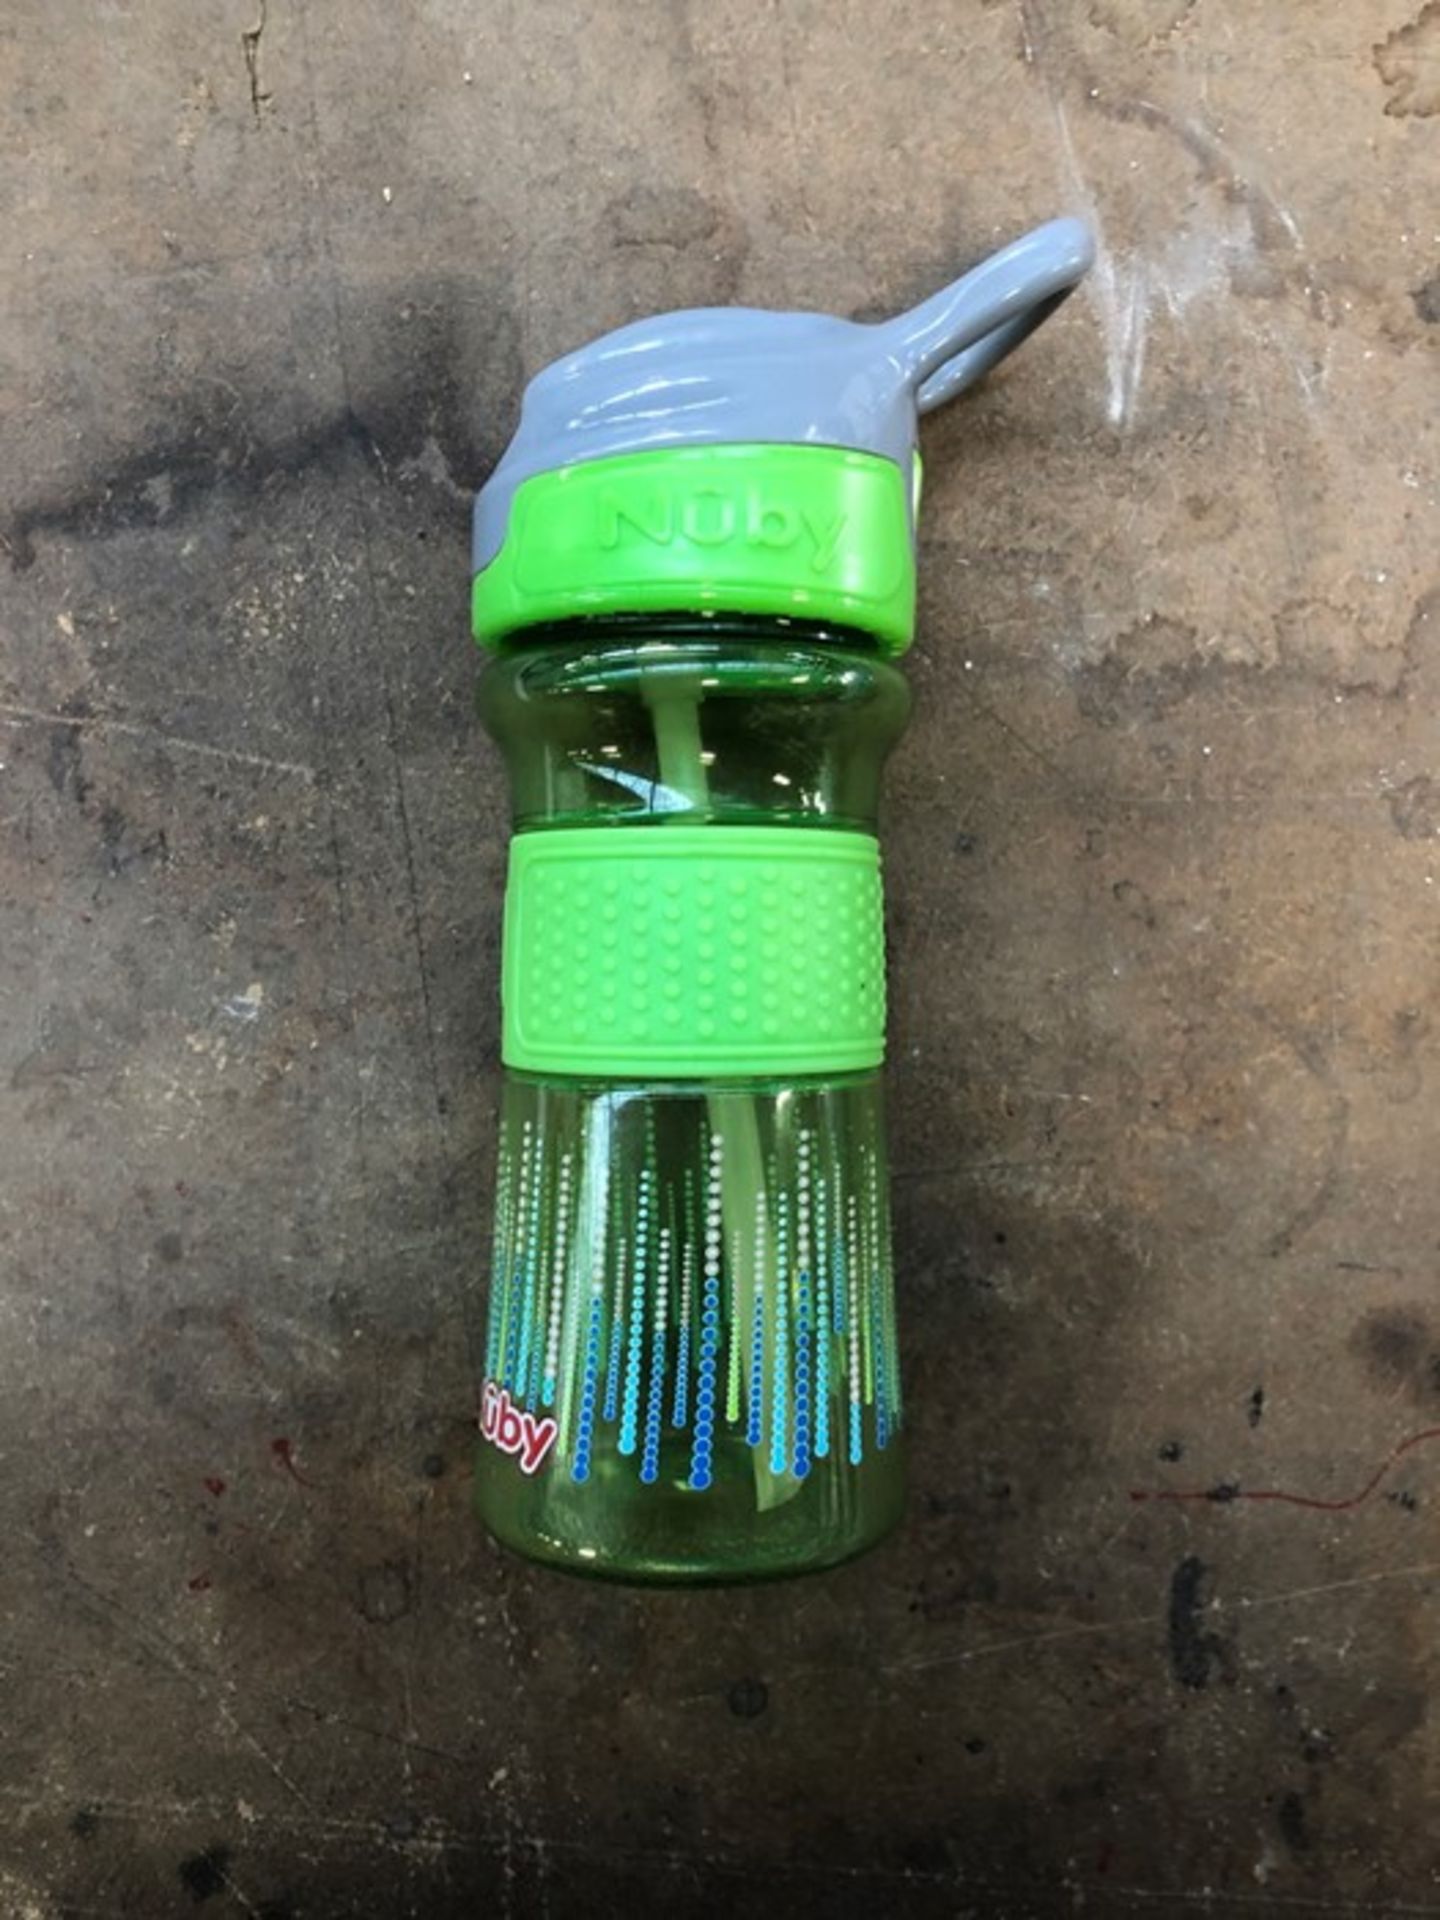 1 GREEN PLASTIC NUBY BOTTLE (PUBLIC VIEWING AVAILABLE)